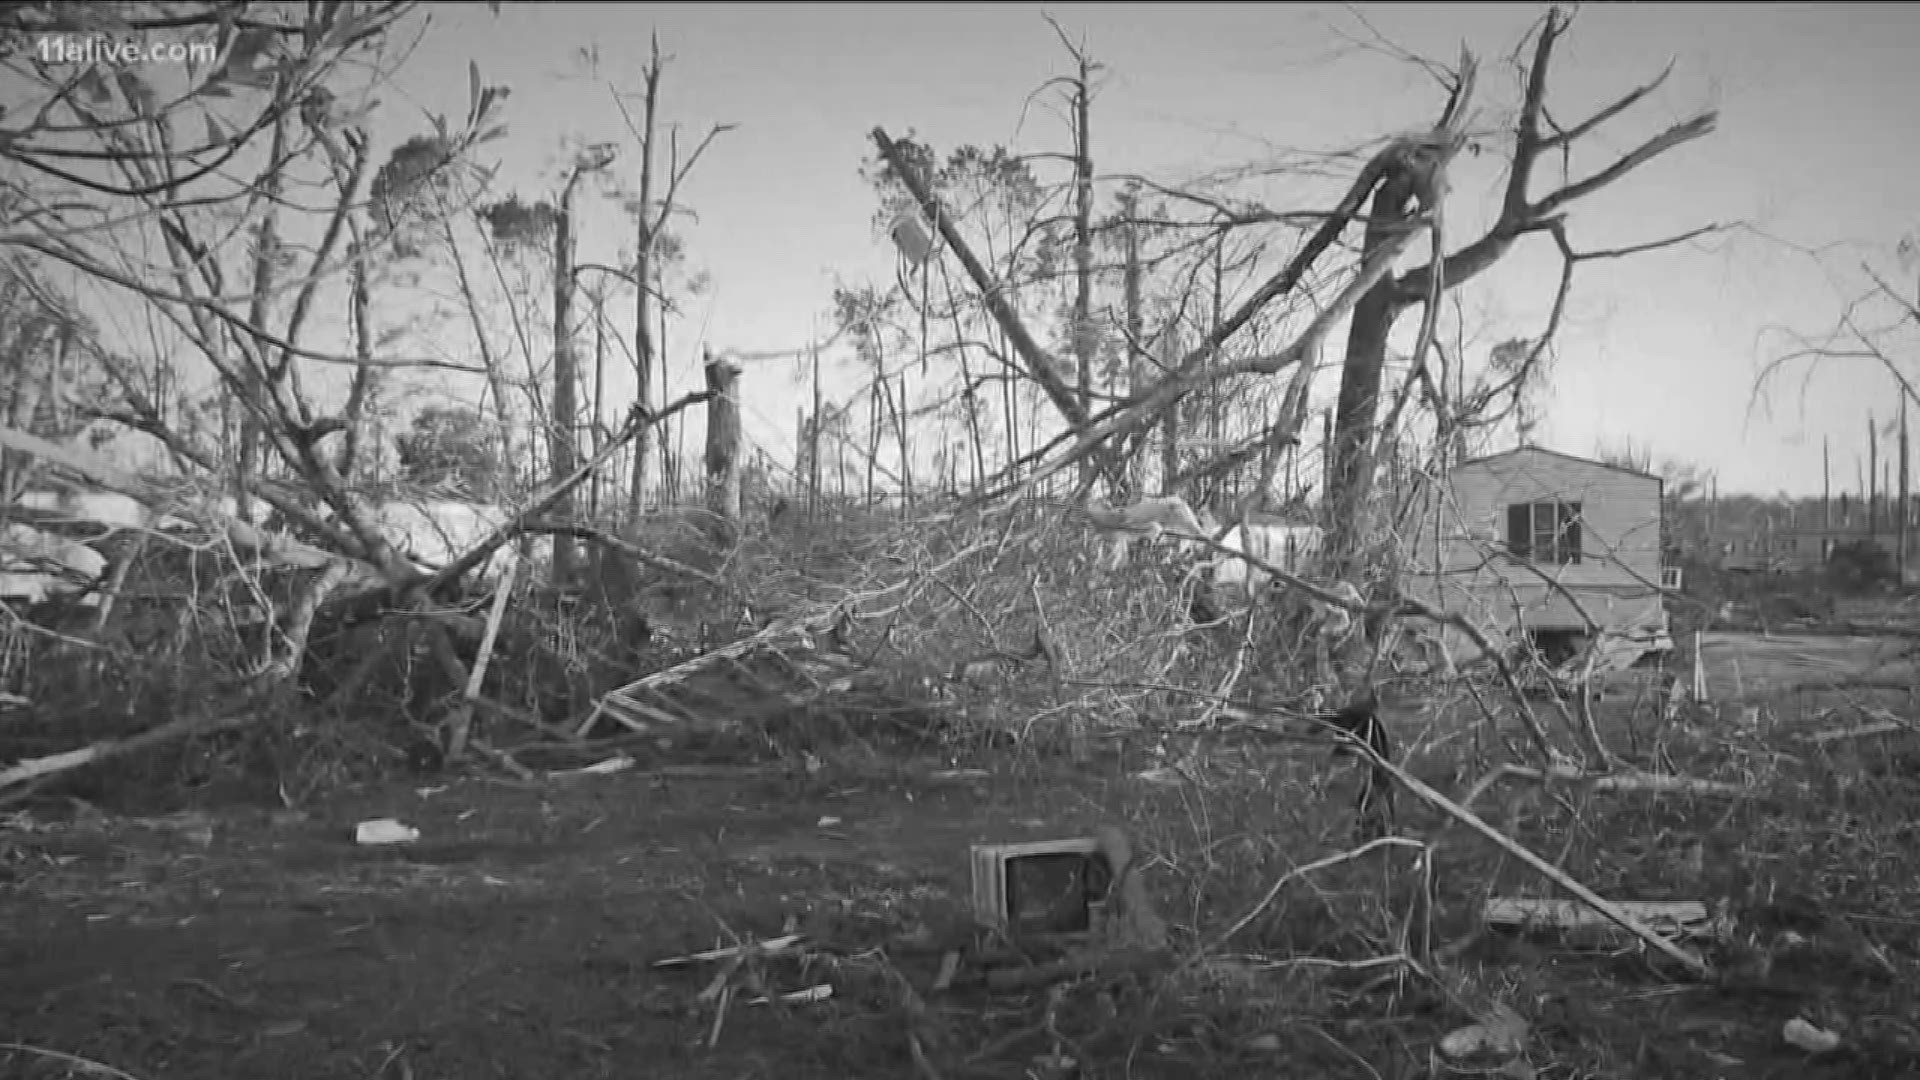 There was no trace of the 2-year-old after the EF-3 tornado hit.